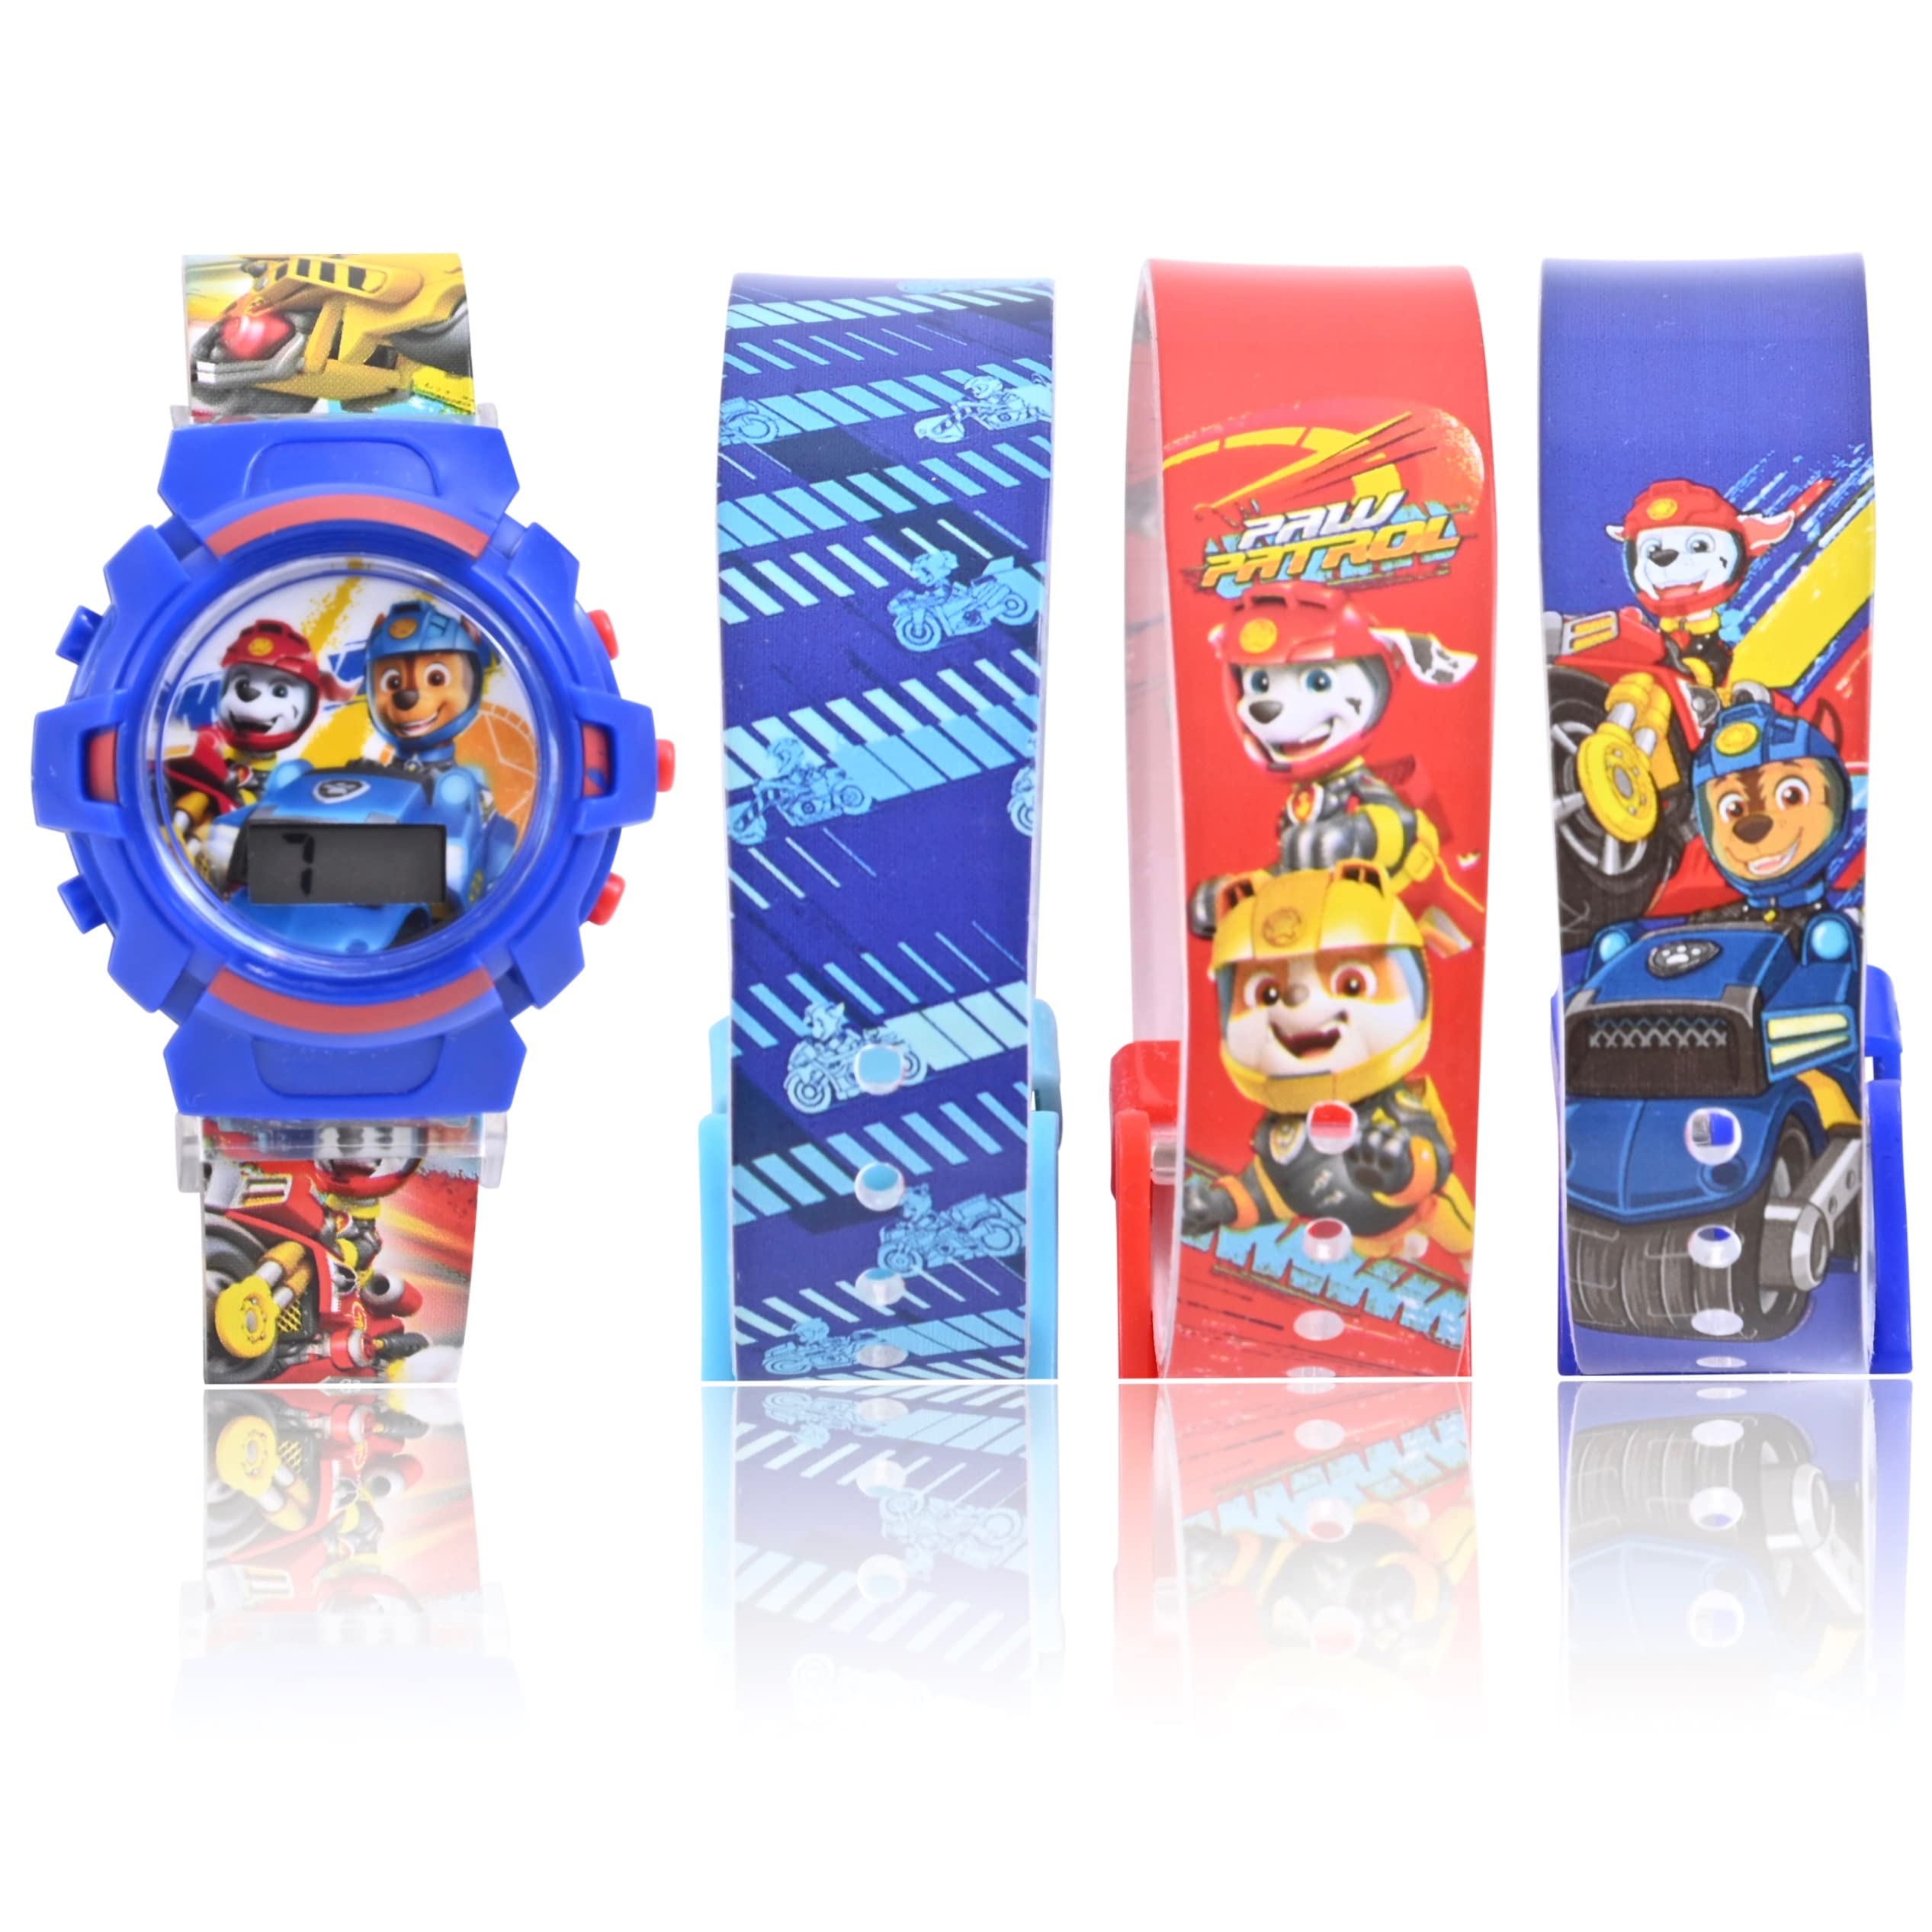 Accutime Paw Patrol Kids Digital Watch - LED Flashing Light, LCD Watch Display, 4 in 1 Interchangeable Plastic Straps, Kids, Girls and Boys Watch, in Multi Color Bands (Model: PAW40084AZ)